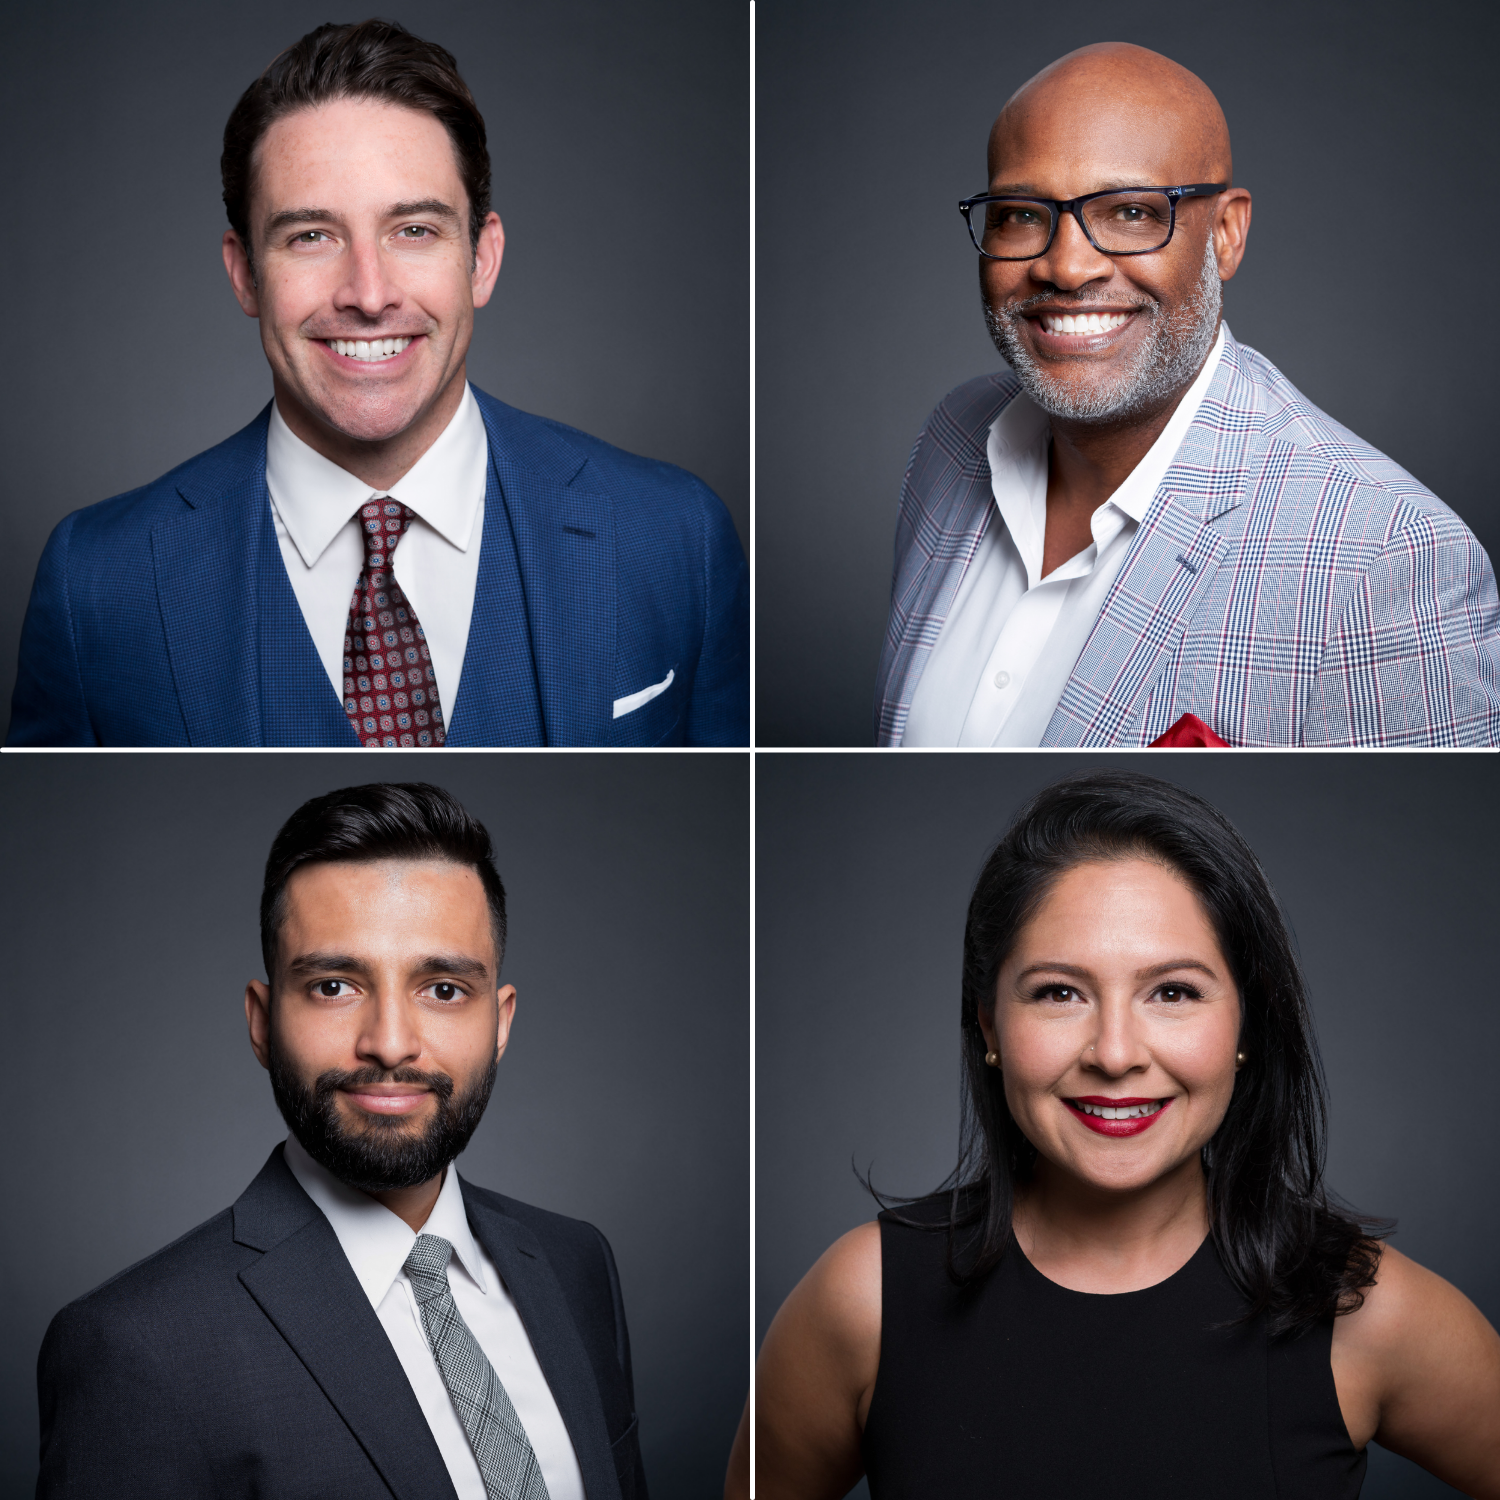 law firm headshots example